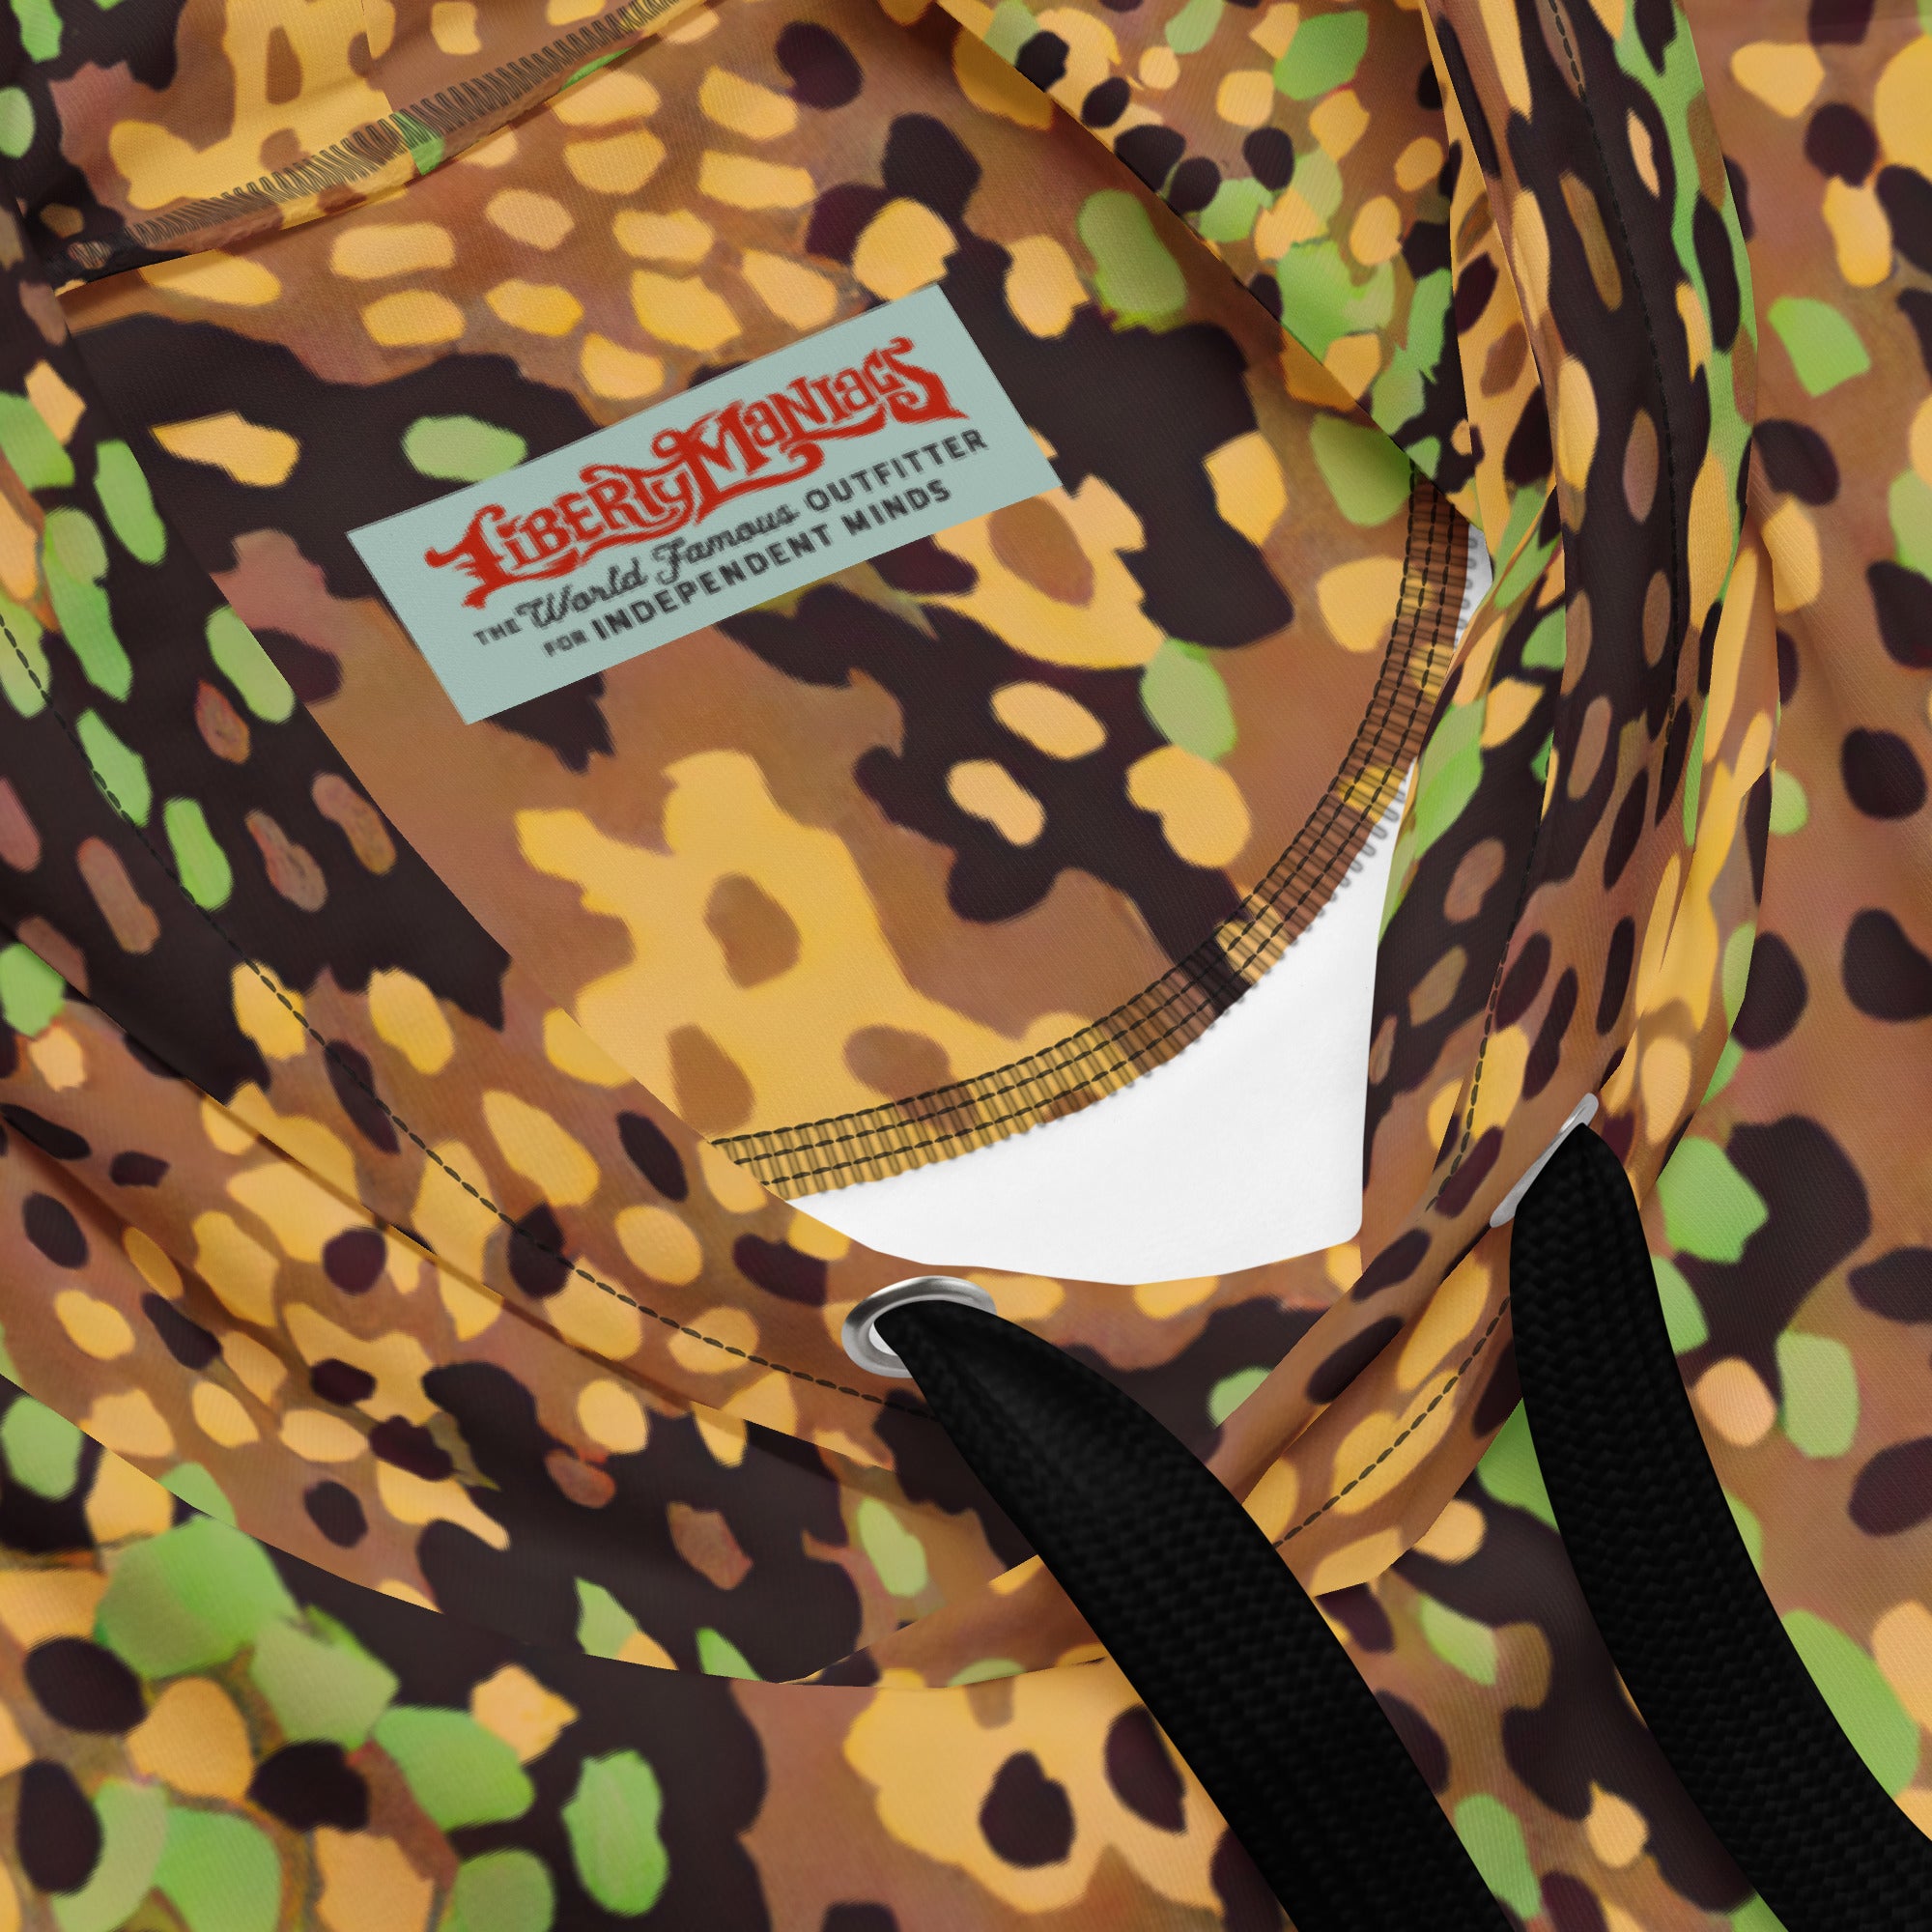 Erbsenmuster WW2 Camouflage Pullover Hoodie